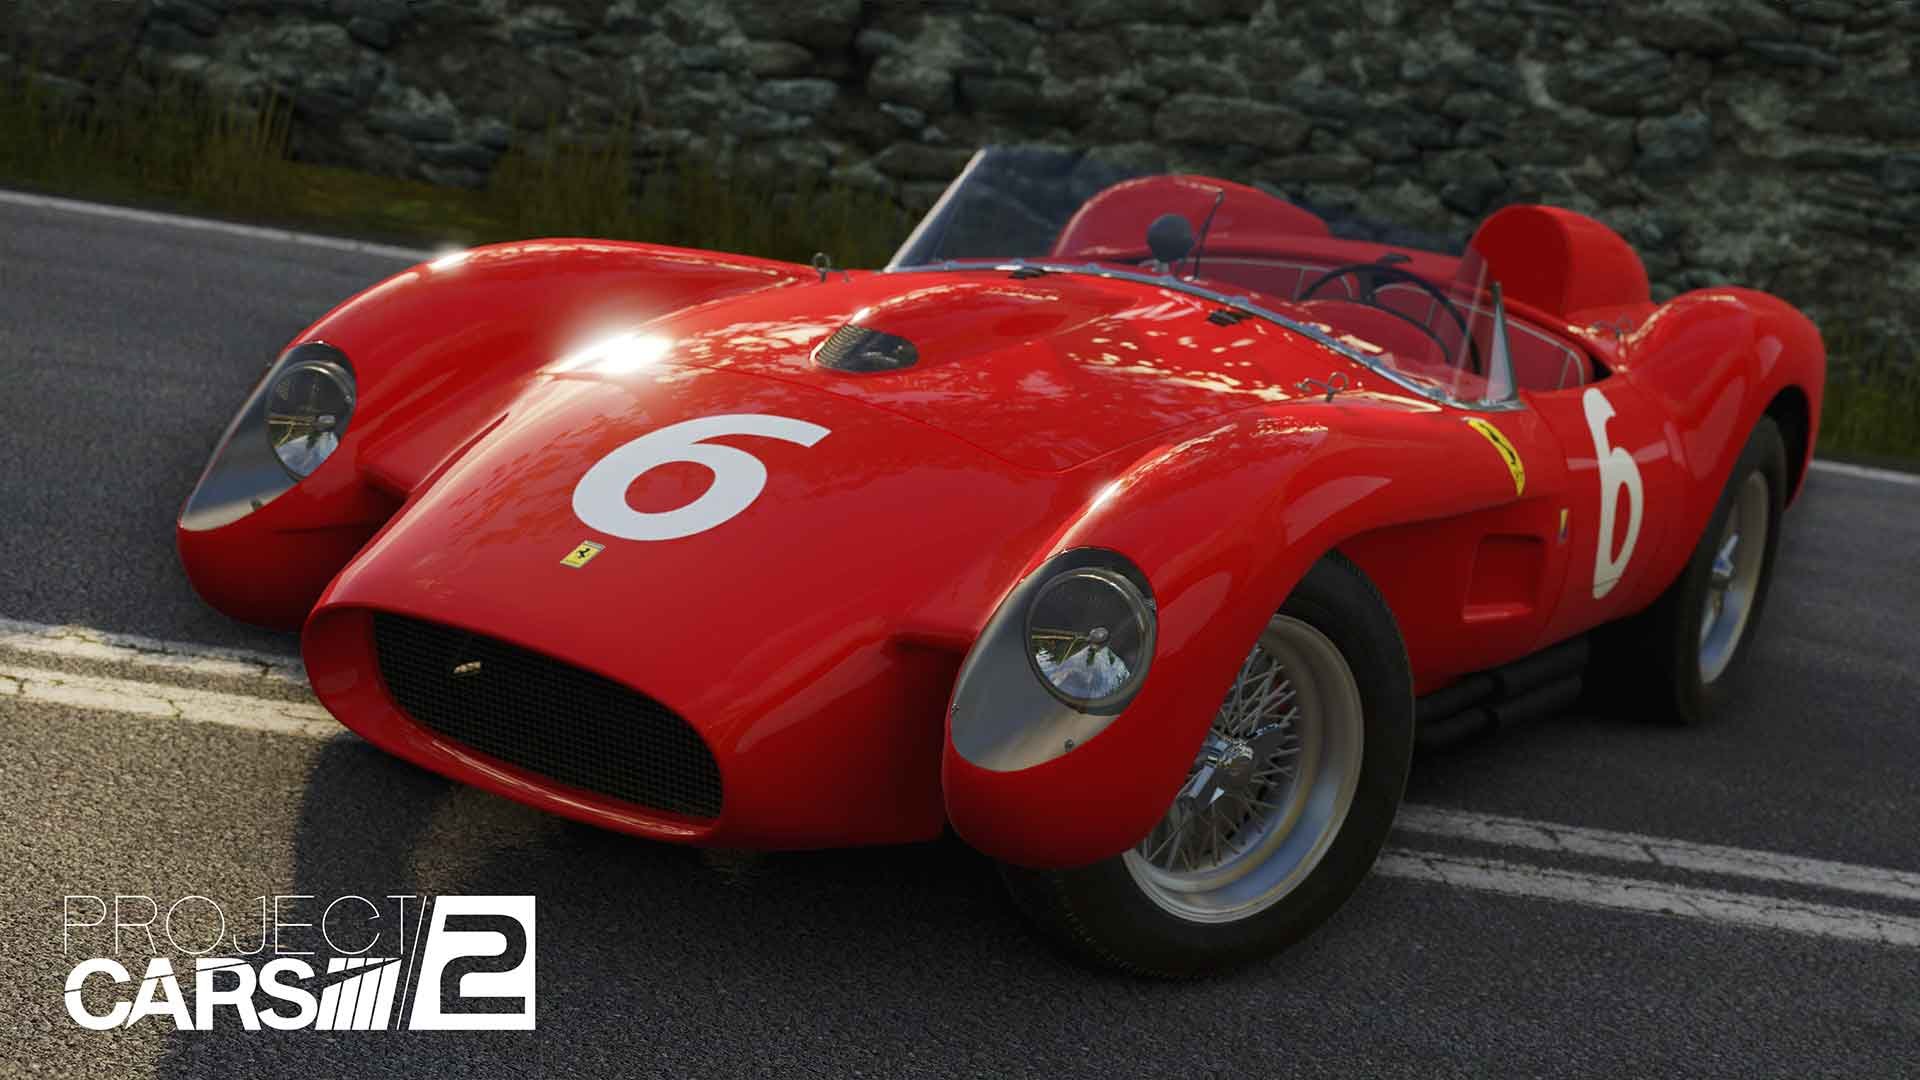 More information about "Project CARS 2 Ferrari Essential Pack DLC disponibile"